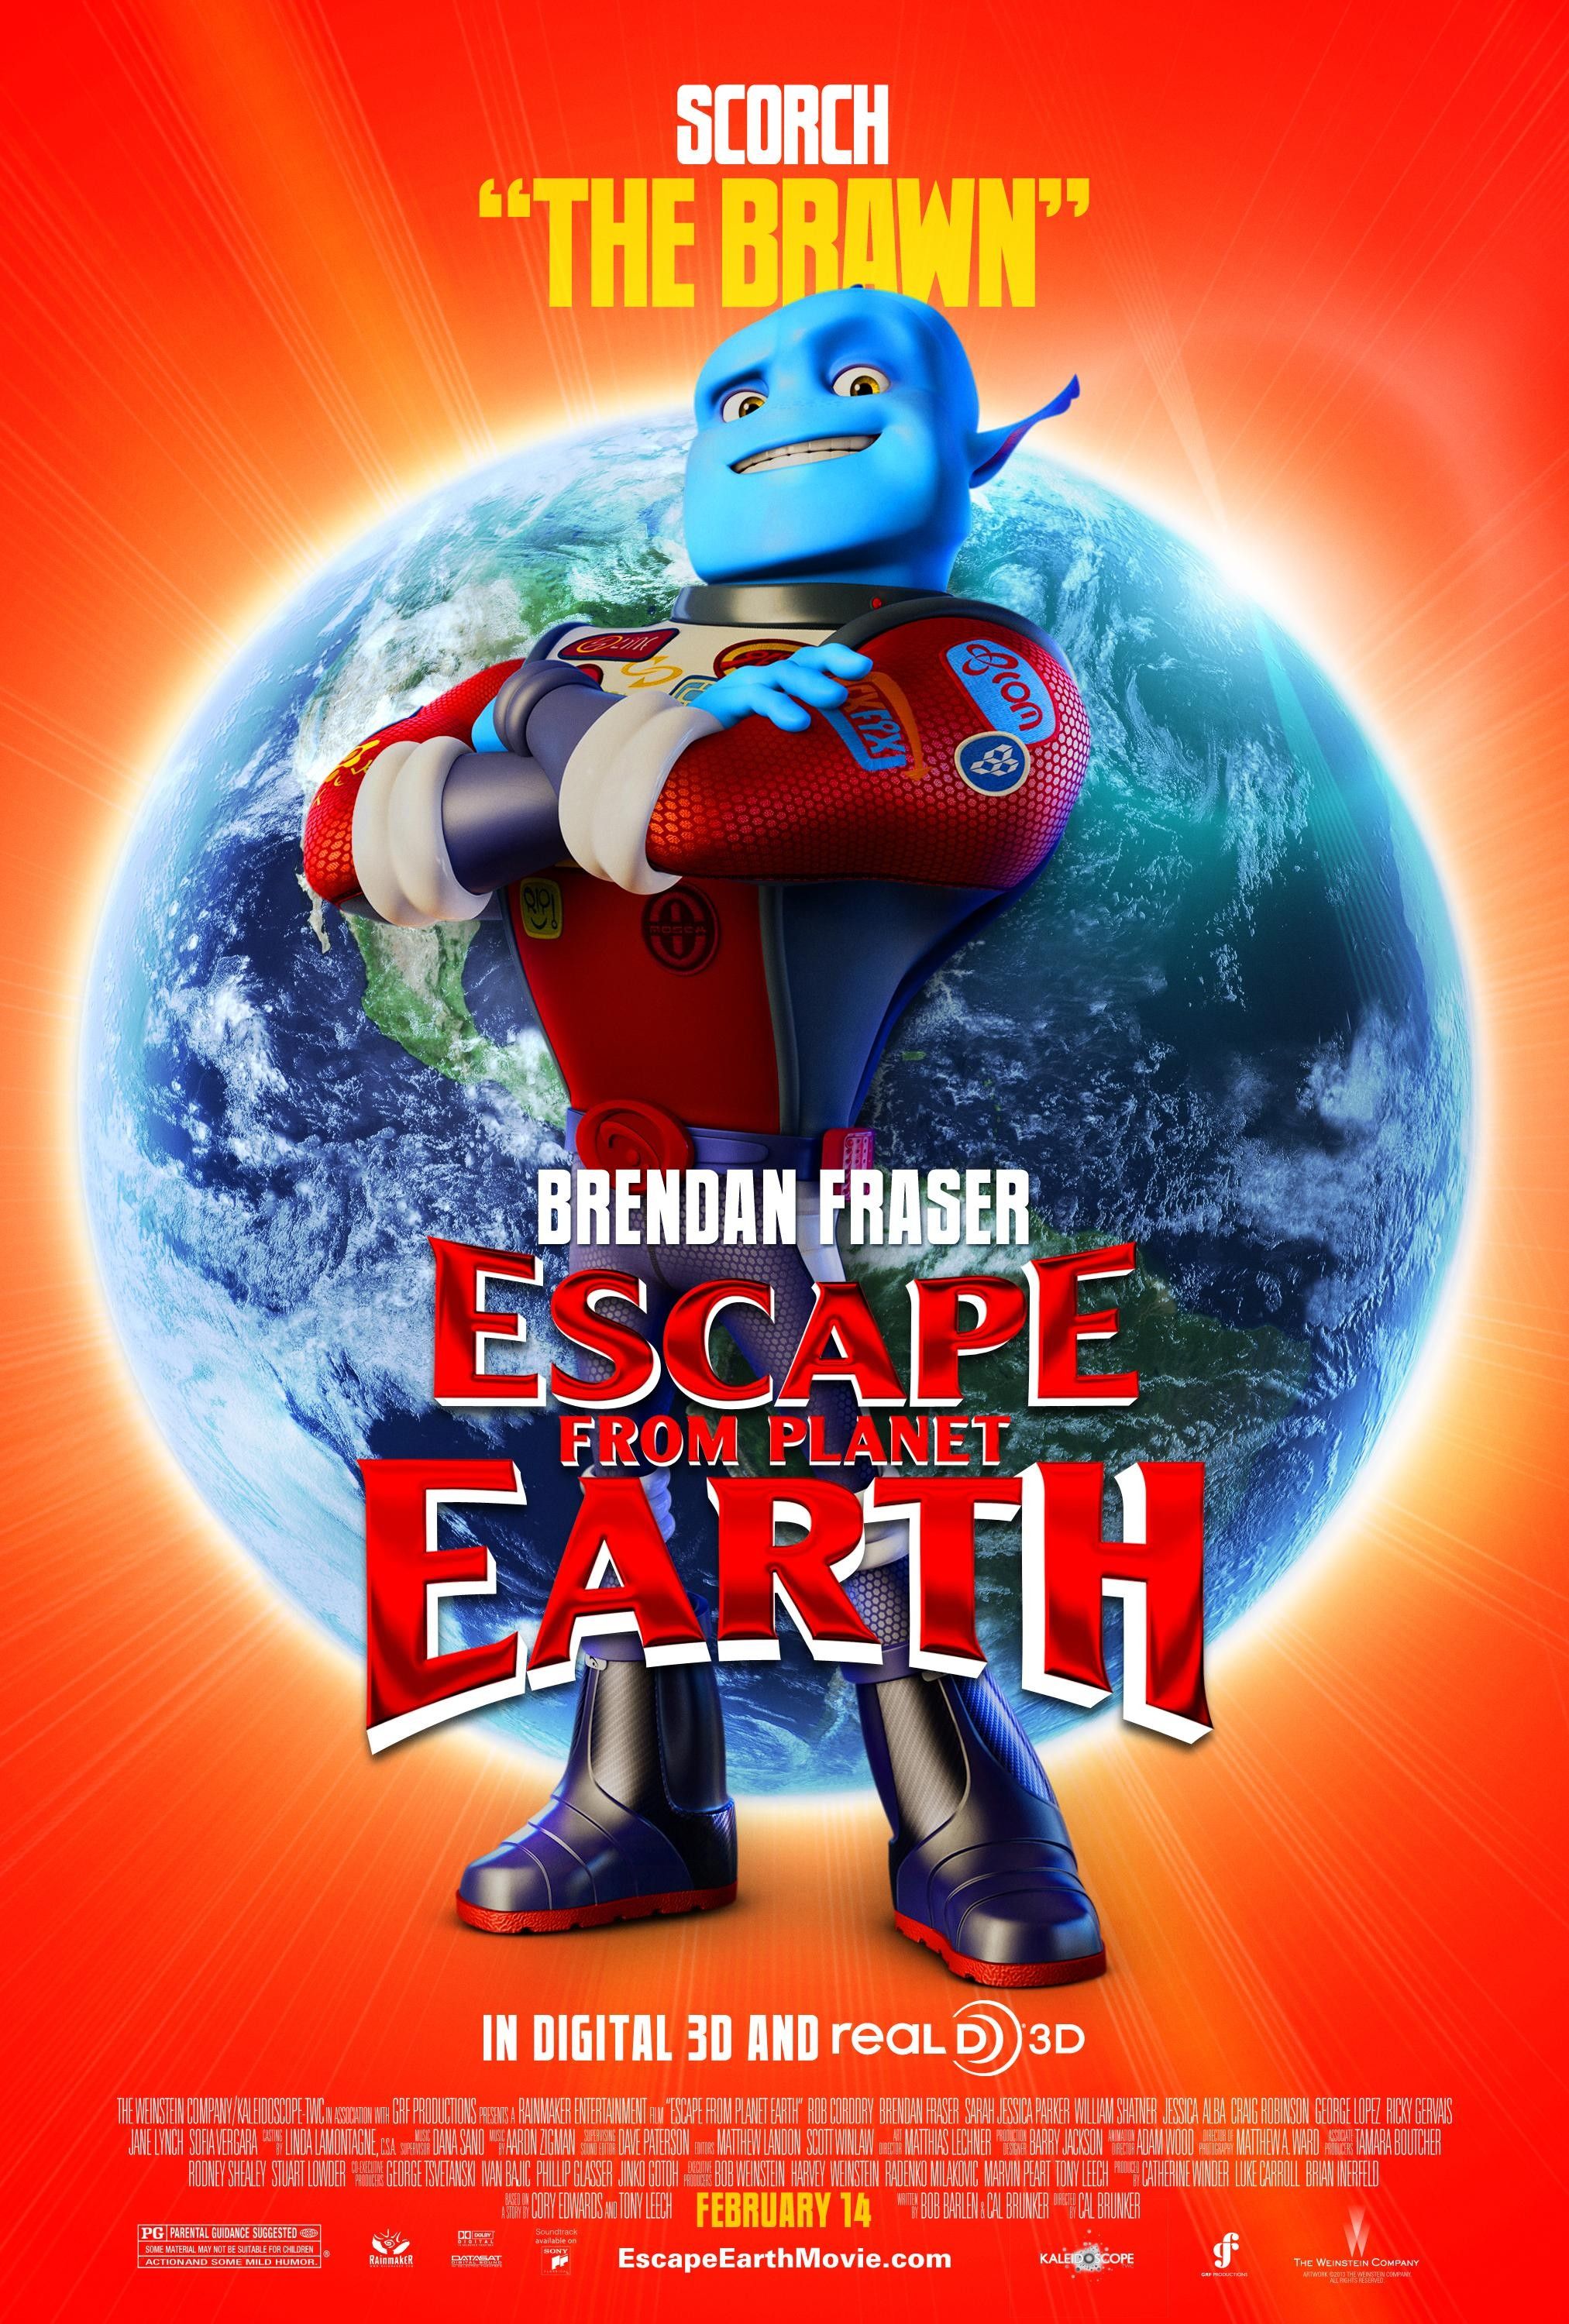 Escape From Planet Earth Scorch Supernova Character Poster